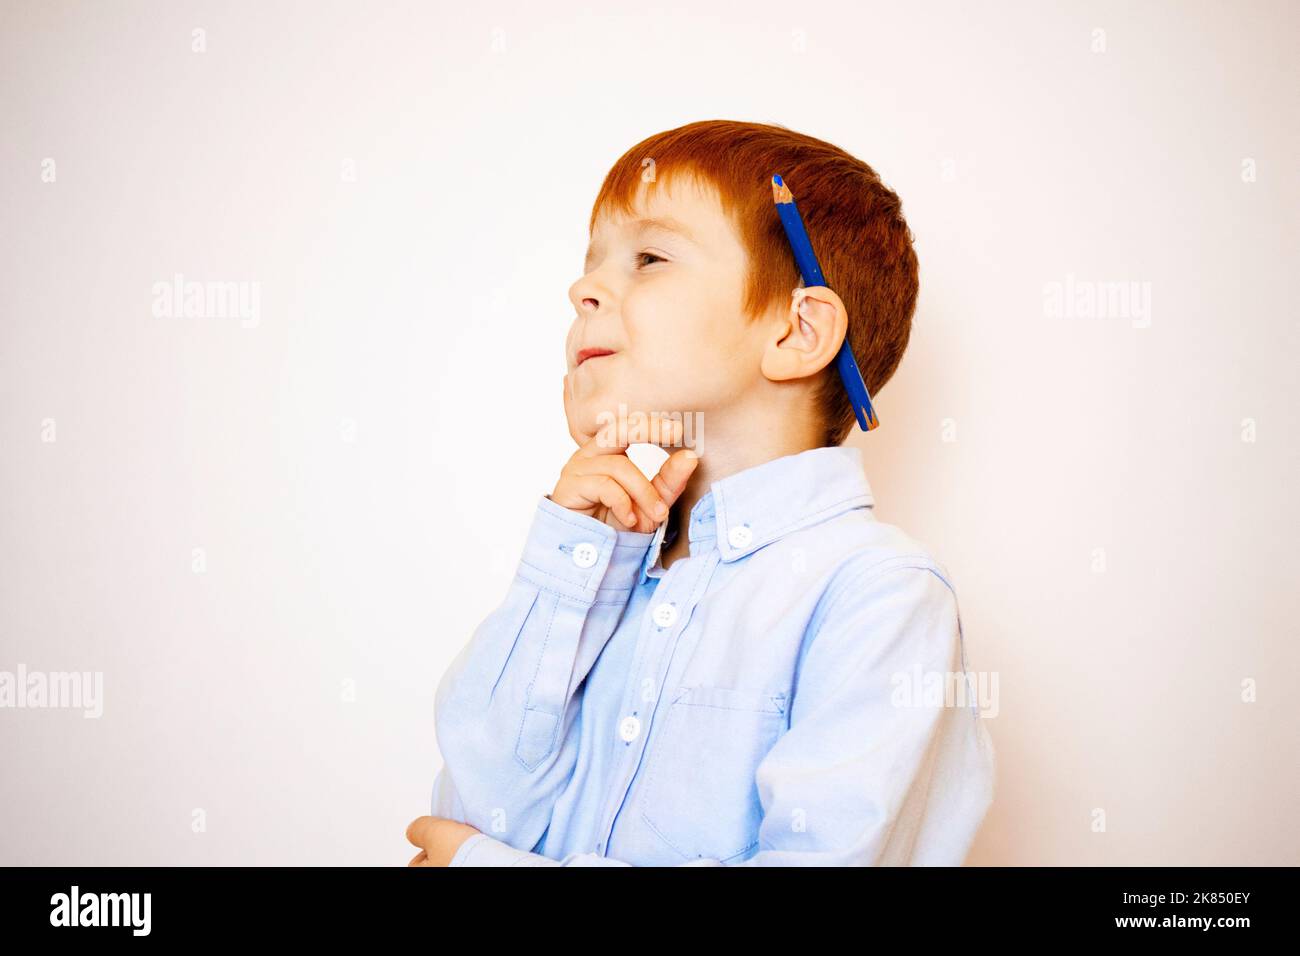 a little red-haired boy cheerful and thoughtful in a shirt with a pencil on a white background Stock Photo